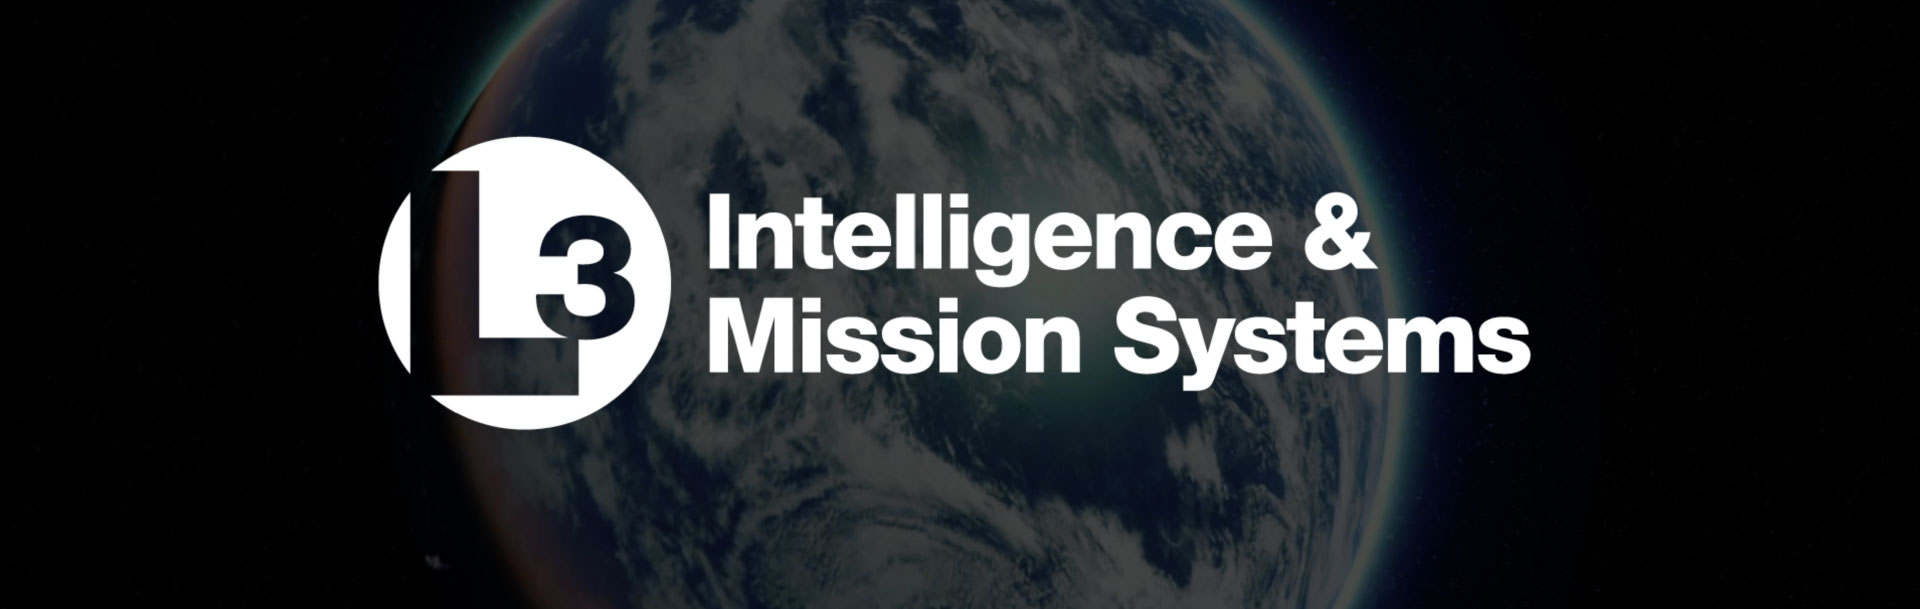 L3 Intelligence and Mission Systems Header